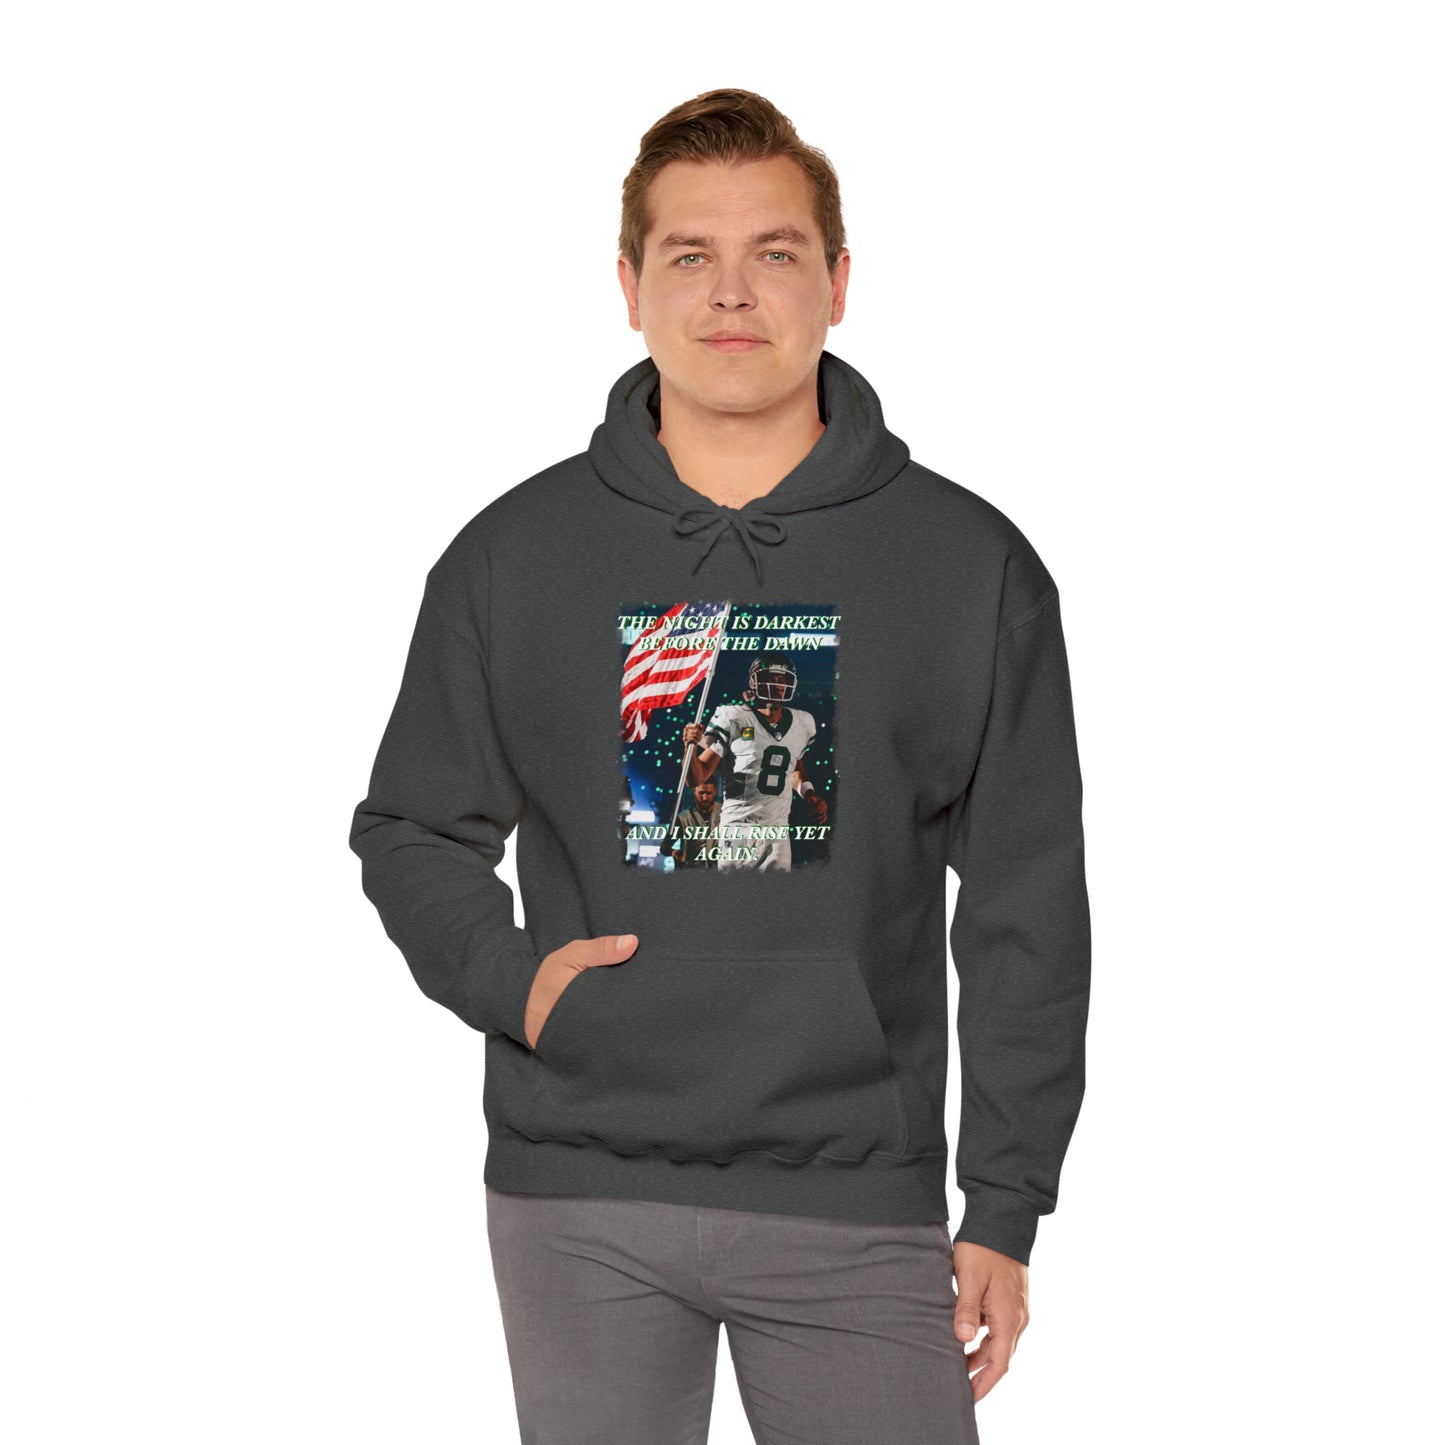 AAron Rodgers Night is darkest before the dawn and I shall rise again Sweatshirt